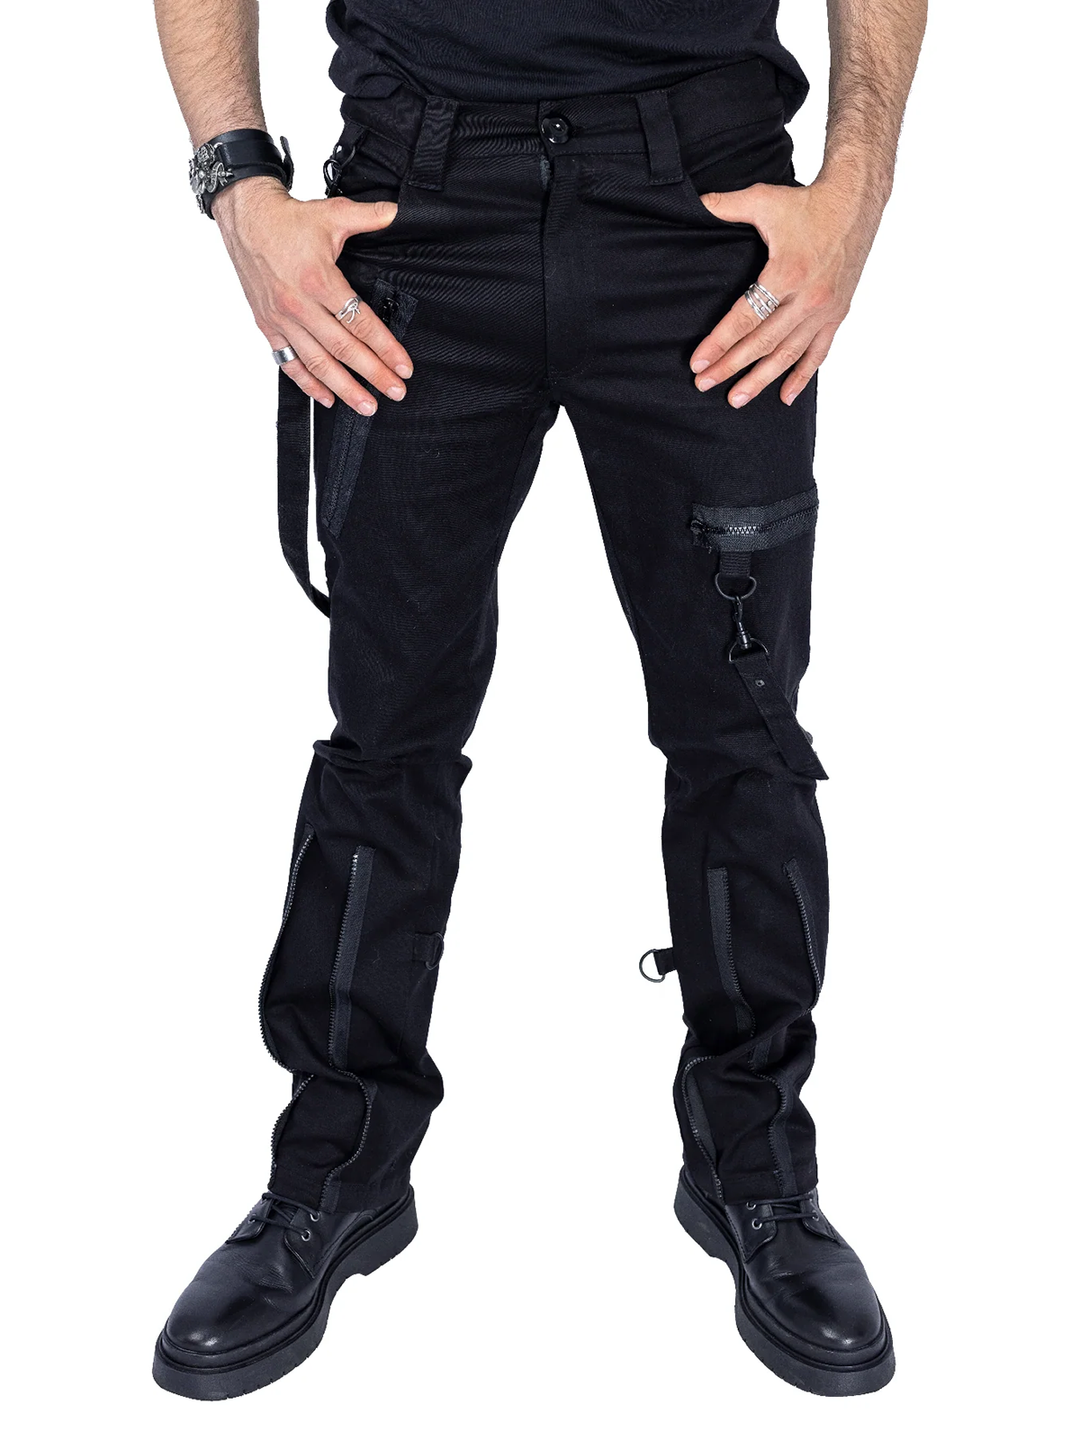 Black Pants with Buckle Details